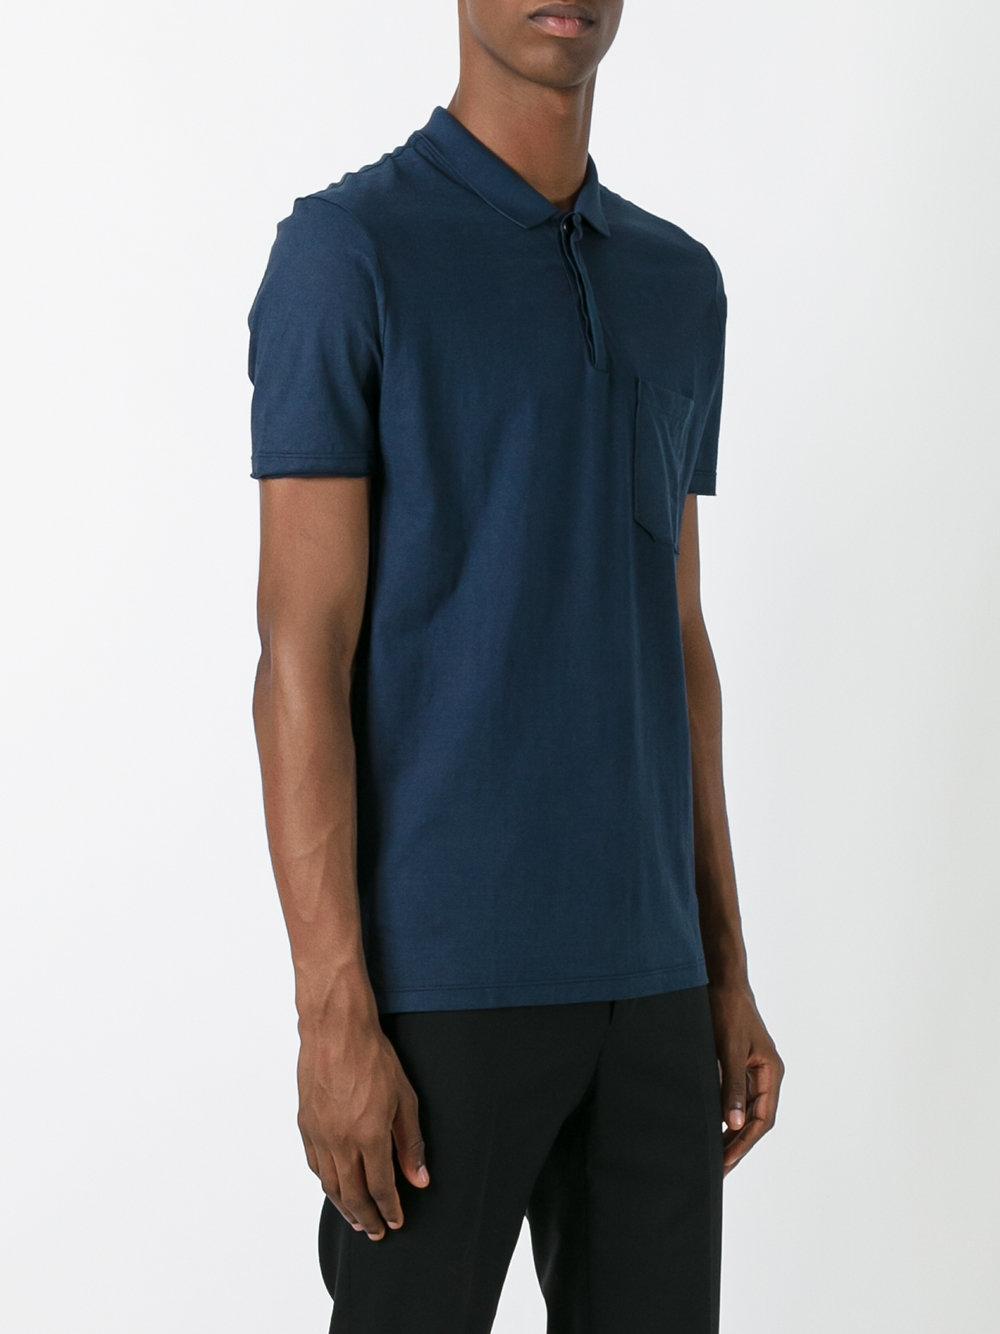 Lanvin Cotton Front Pocket Polo Shirt in Blue for Men - Lyst